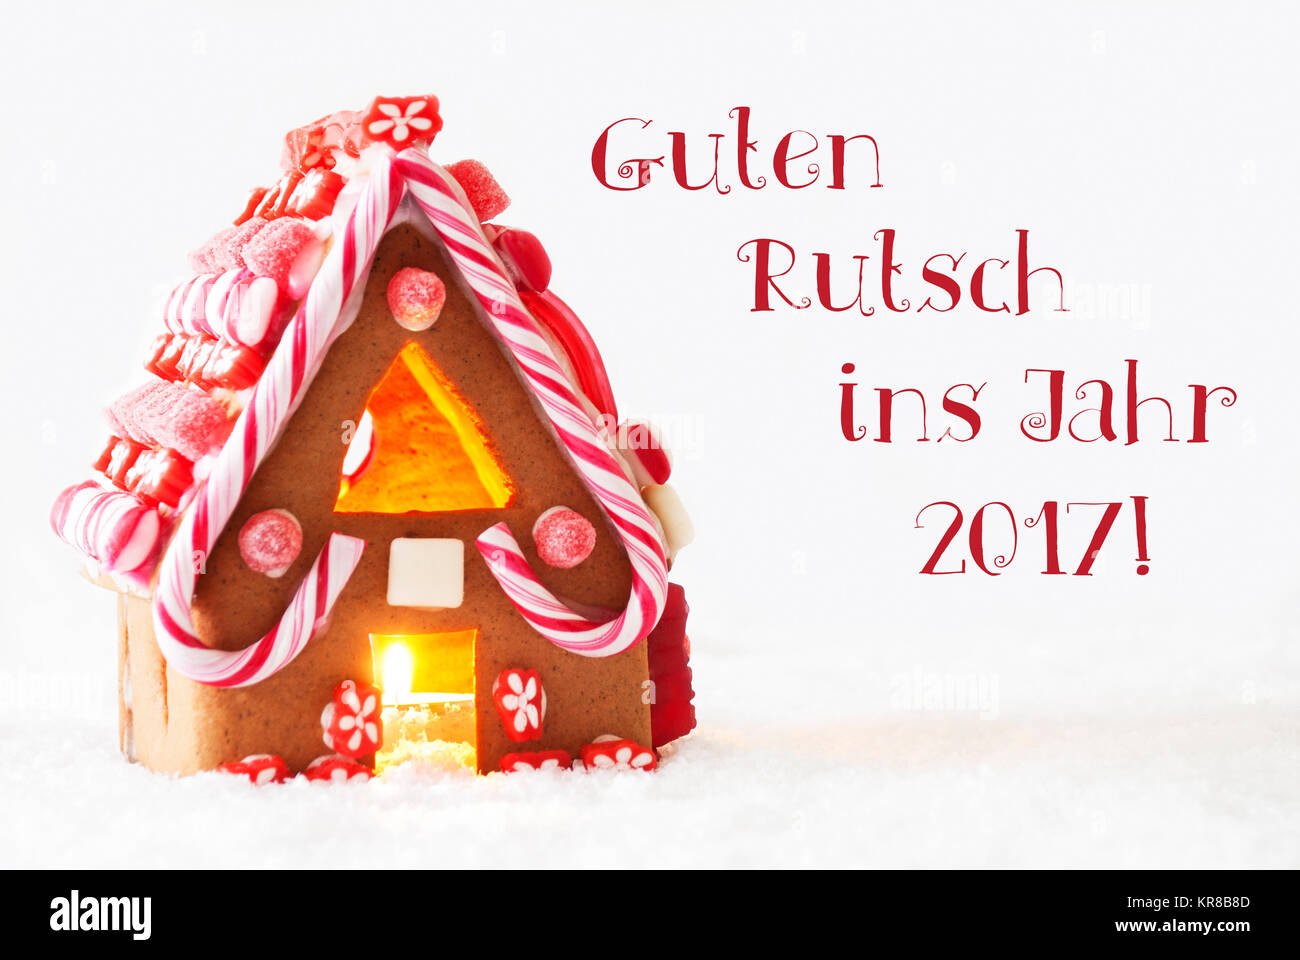 Gingerbread House In Snowy Scenery As Christmas Decoration With White Background. Candlelight For Romantic Atmosphere. German Text Guten Rutsch Ins Jahr 2017 Means Happy New Year Stock Photo